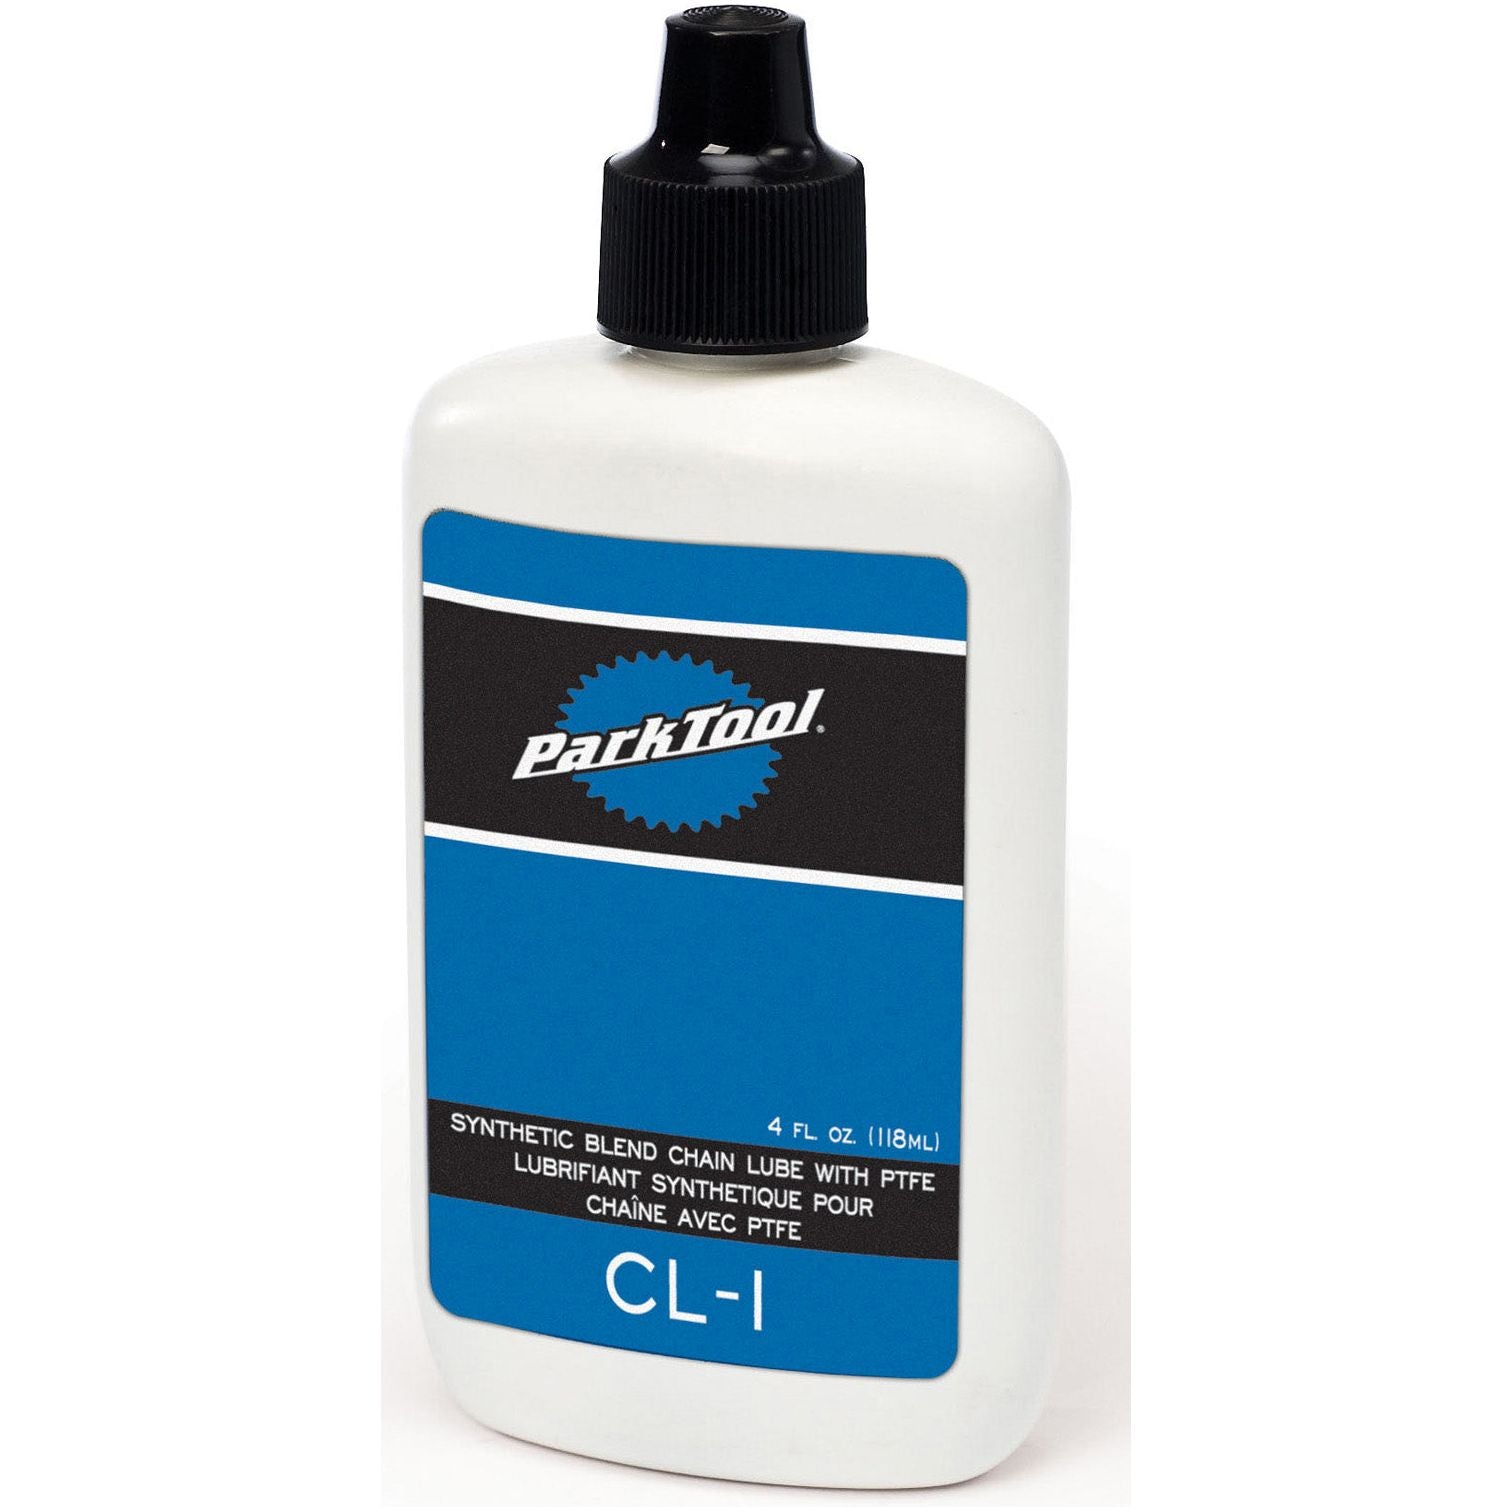 Park Tool Synthetic Blend Chain Lube Qkcl1